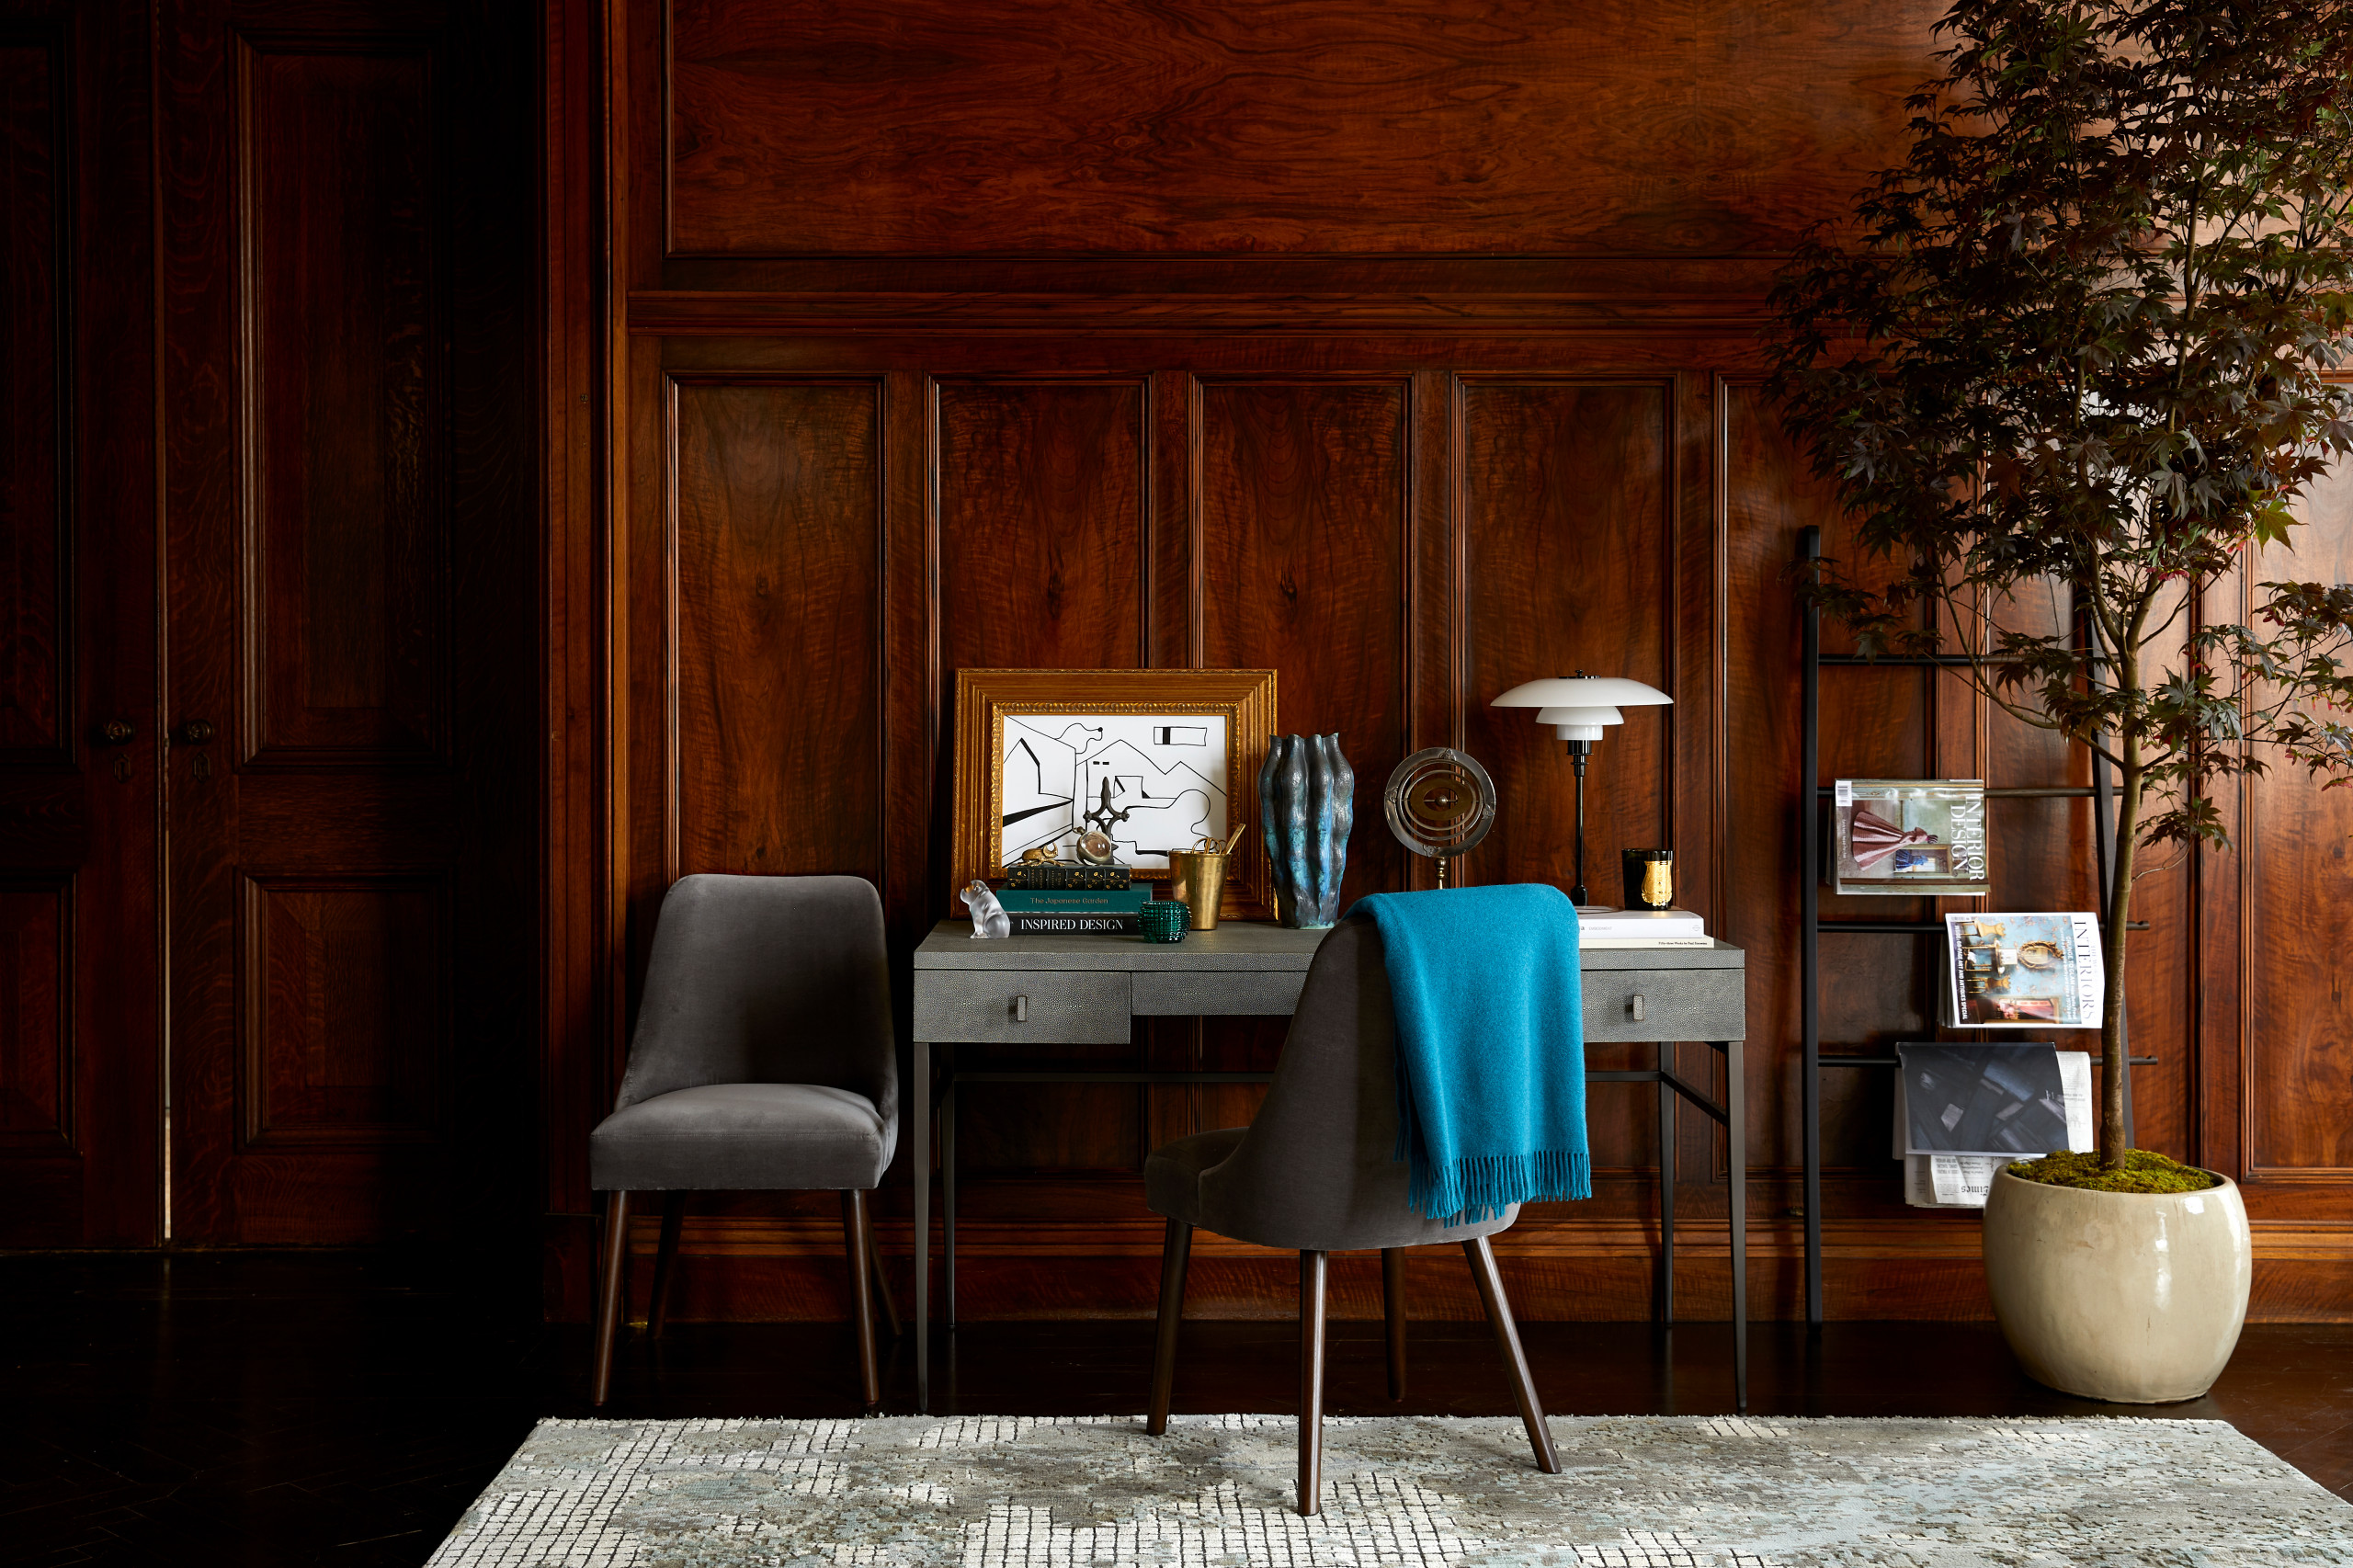 75 Wall Paneling Home Office Ideas You'll Love - October, 2022 | Houzz